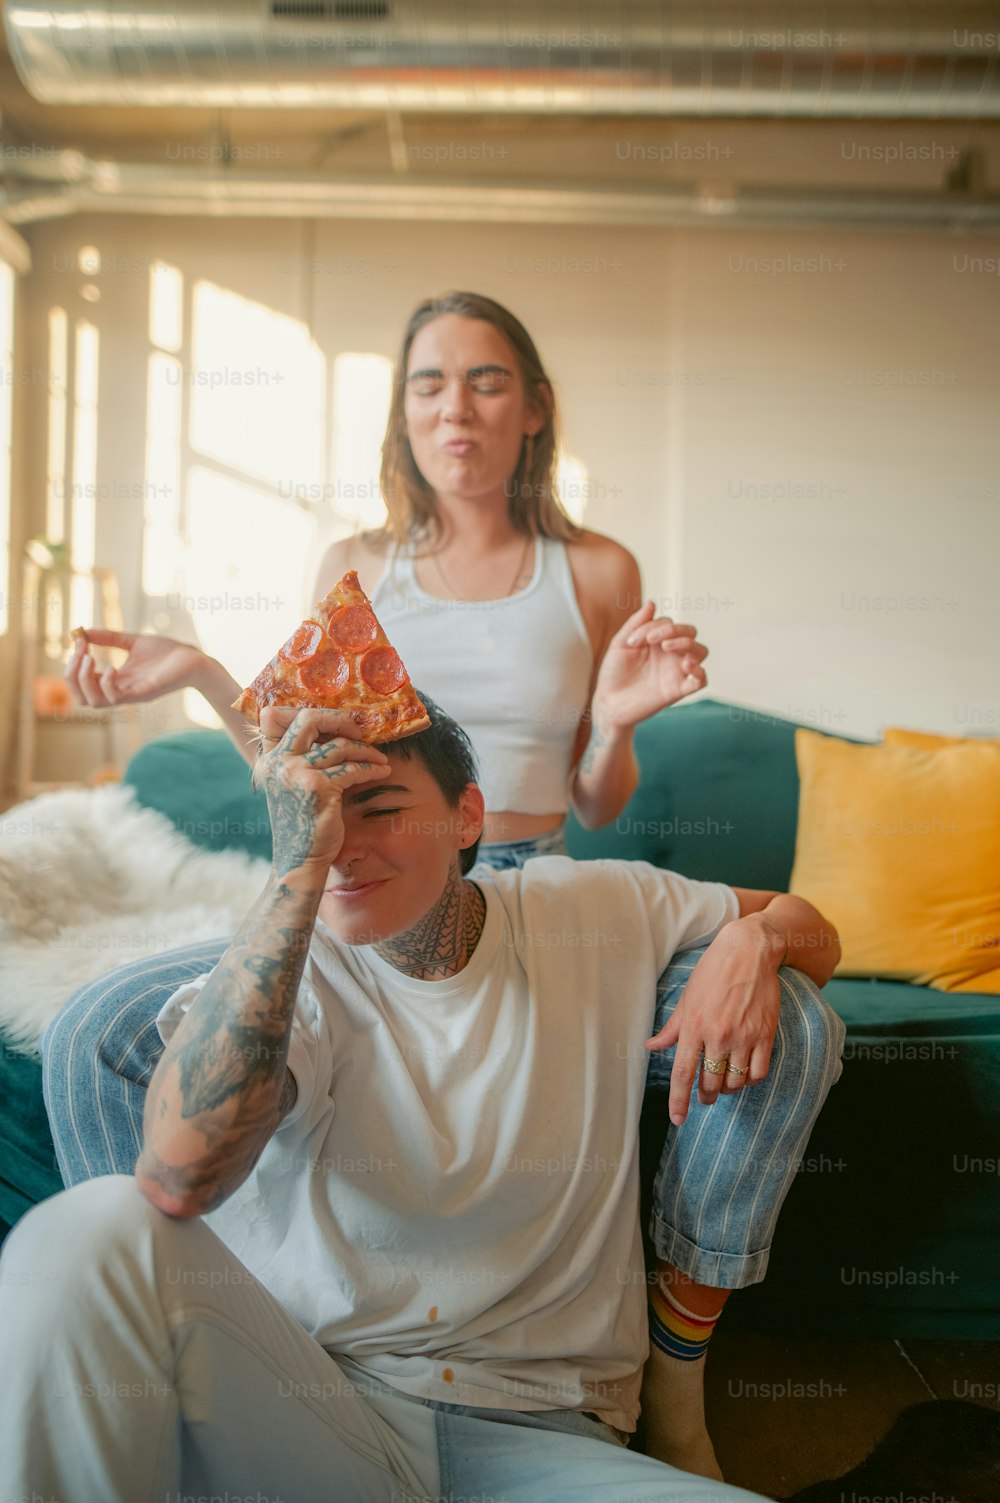 a woman sitting on a couch with a pizza on her head